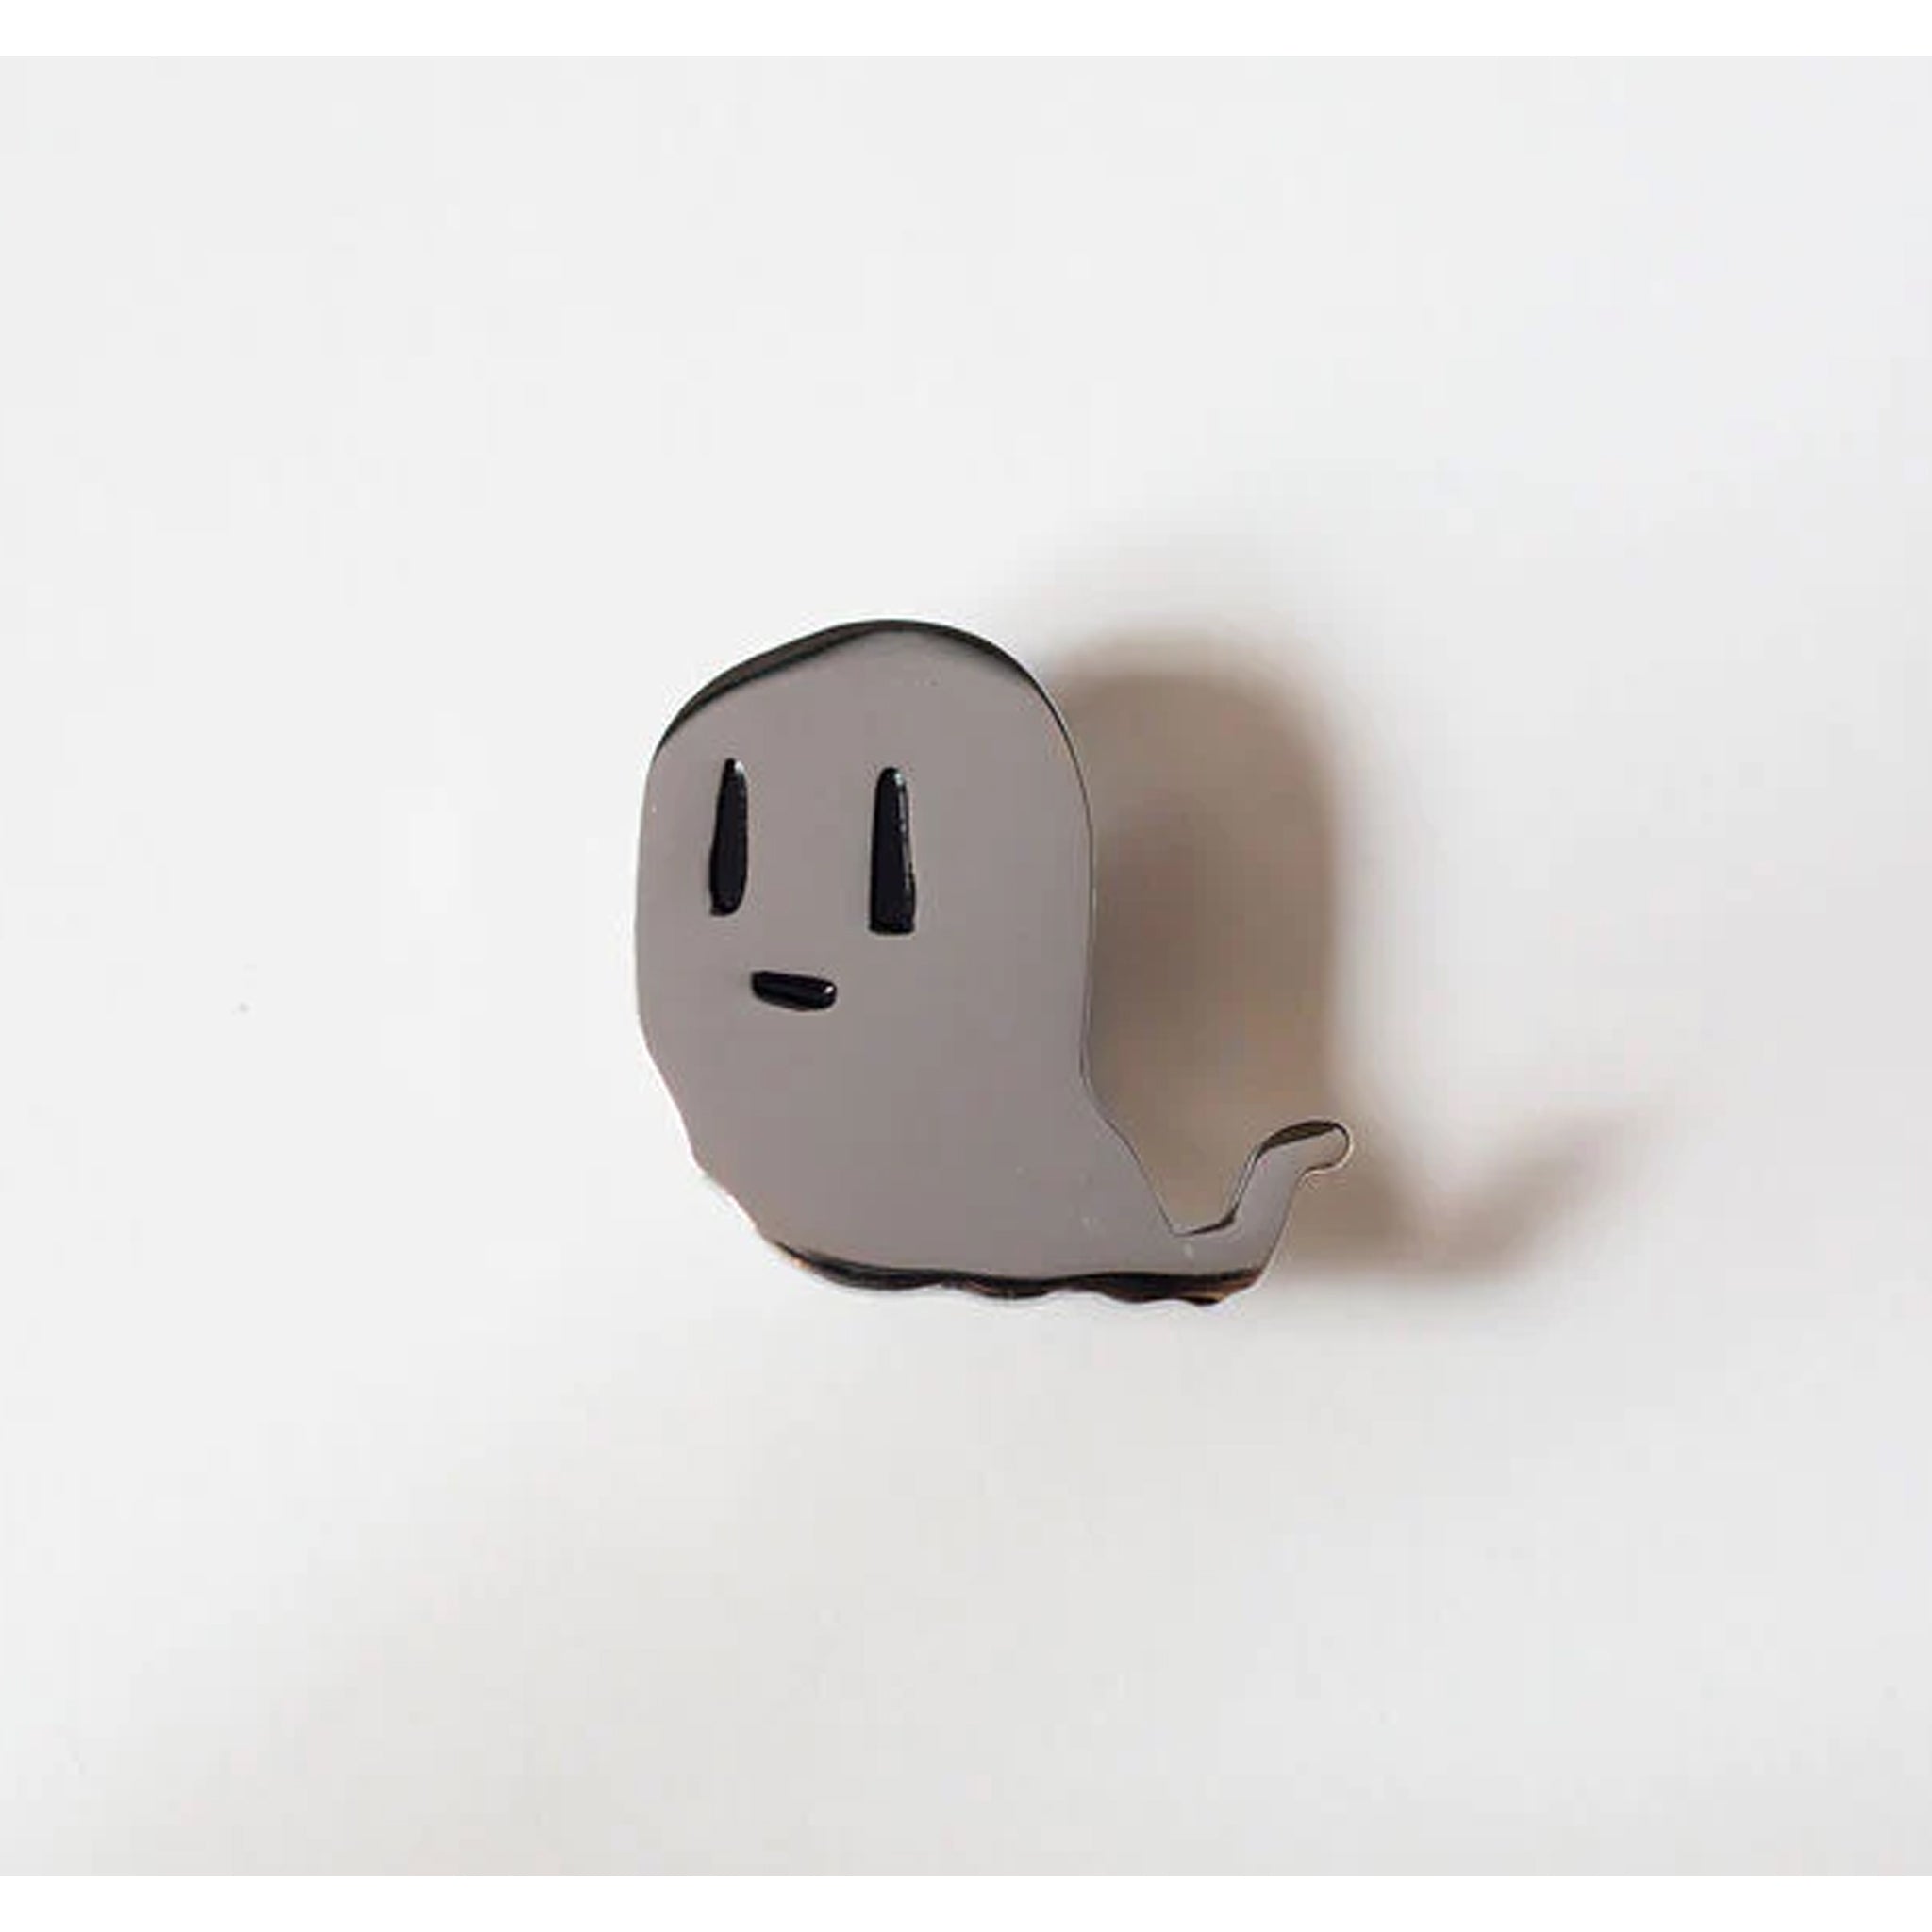 Spoopy Ghost Pin